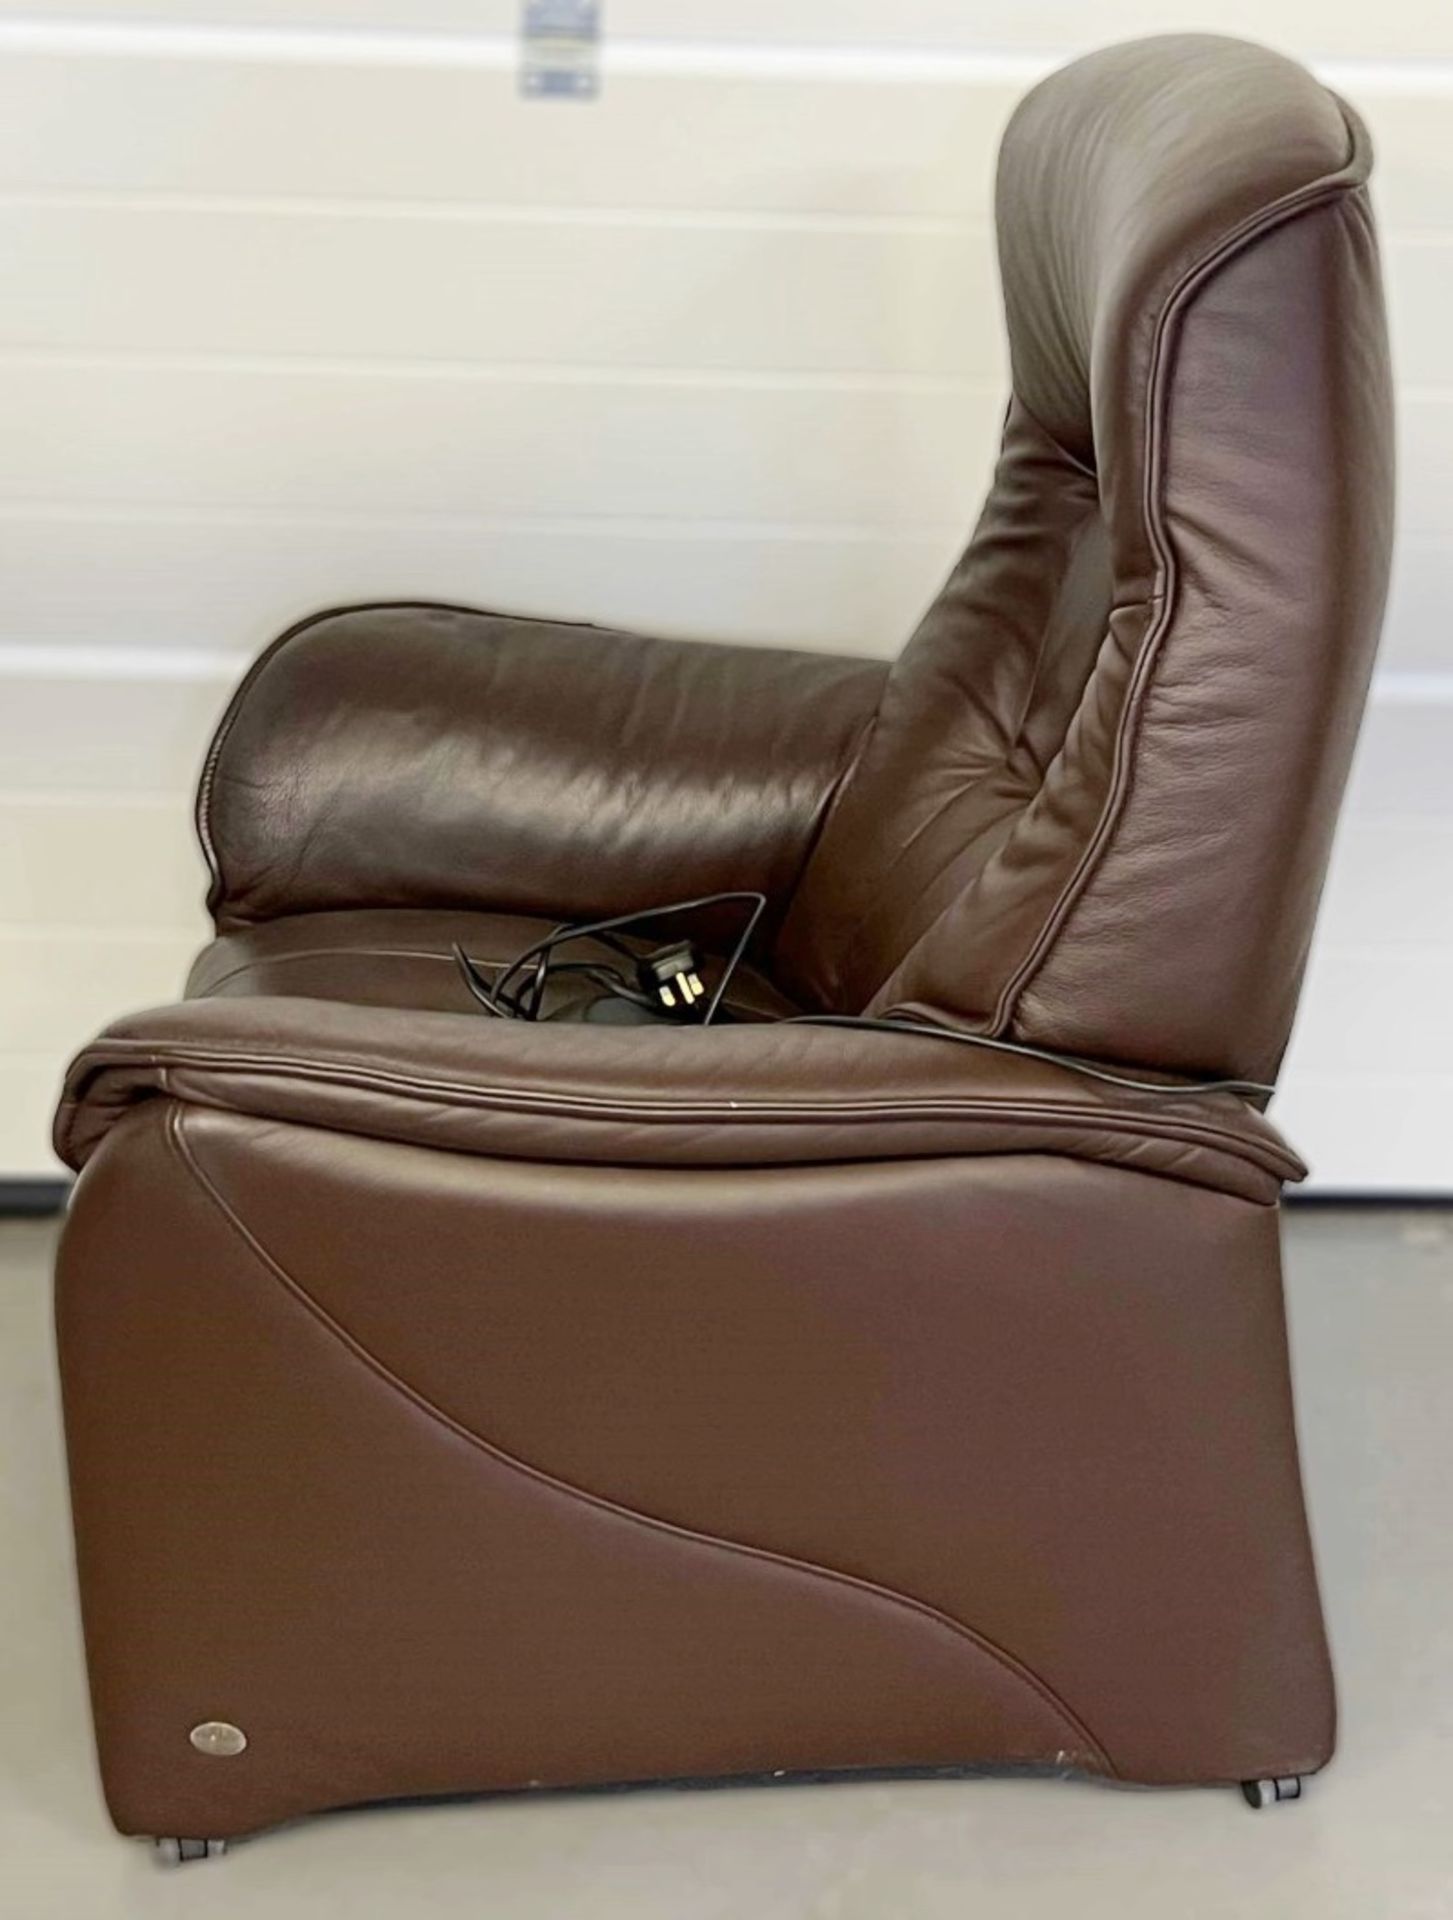 1 x HIMOLLA Premium Dual-Motor Reclining Chair Upholstered In Brown Leather - NO VAT ON THE HAMMER - - Image 2 of 4